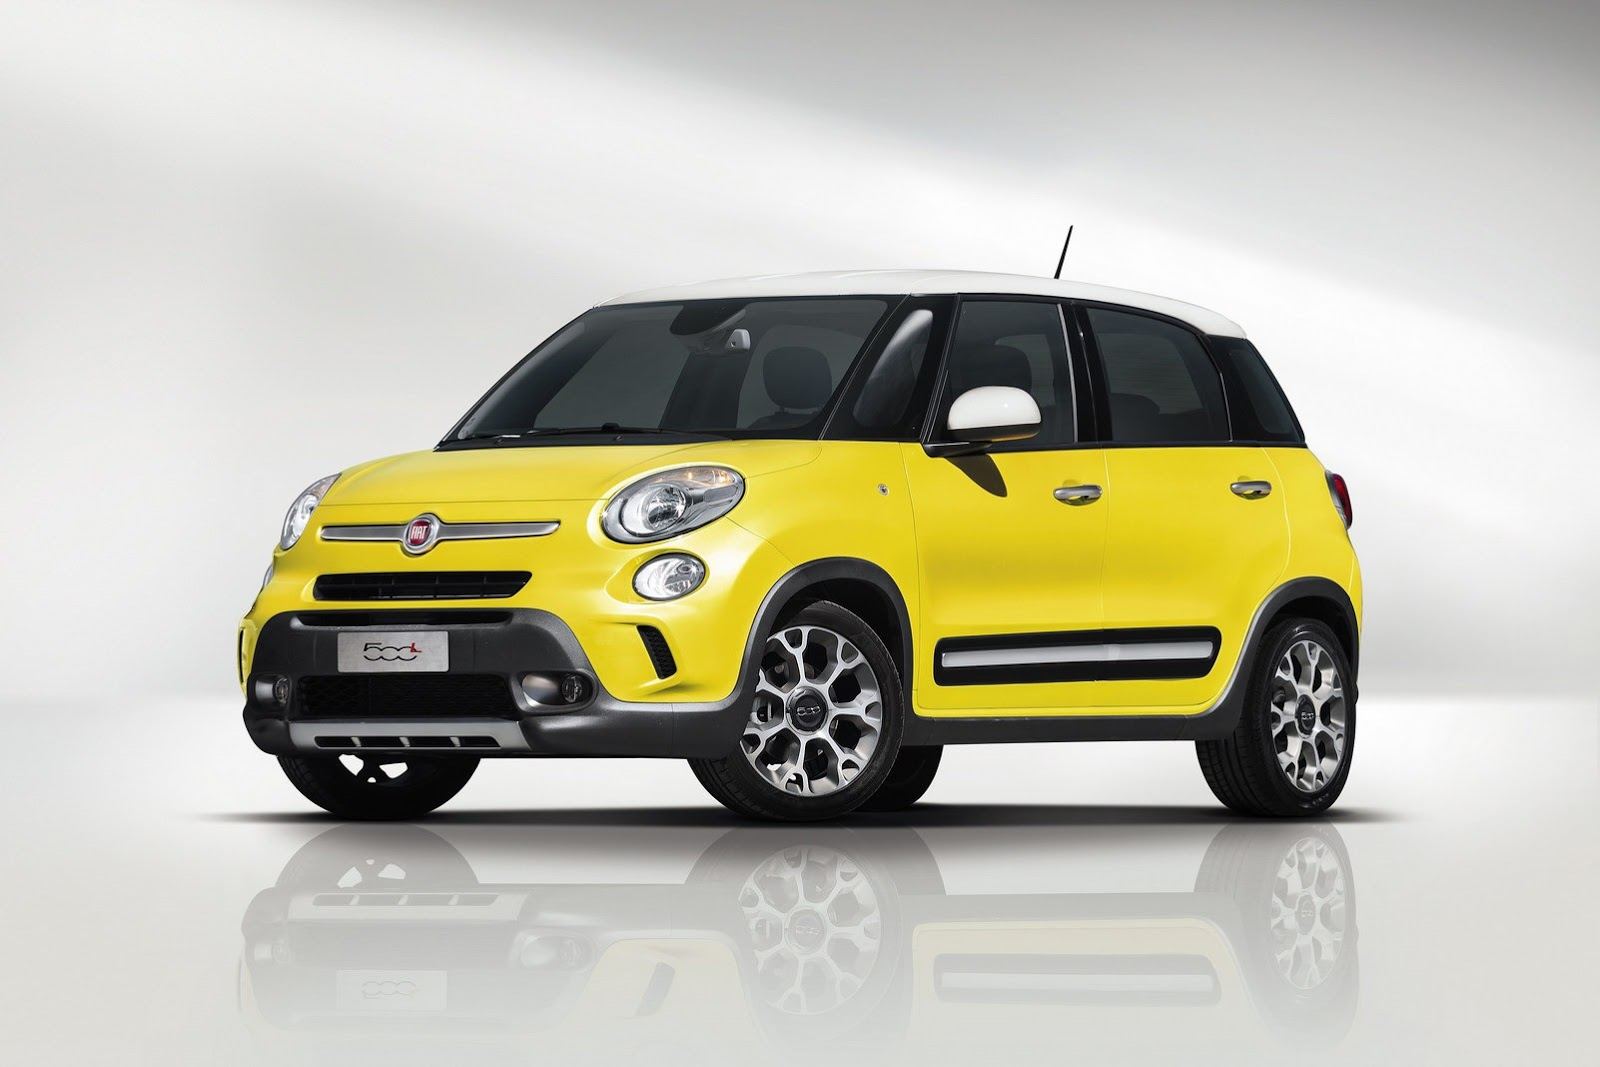 2013 Fiat 500L Front Angle